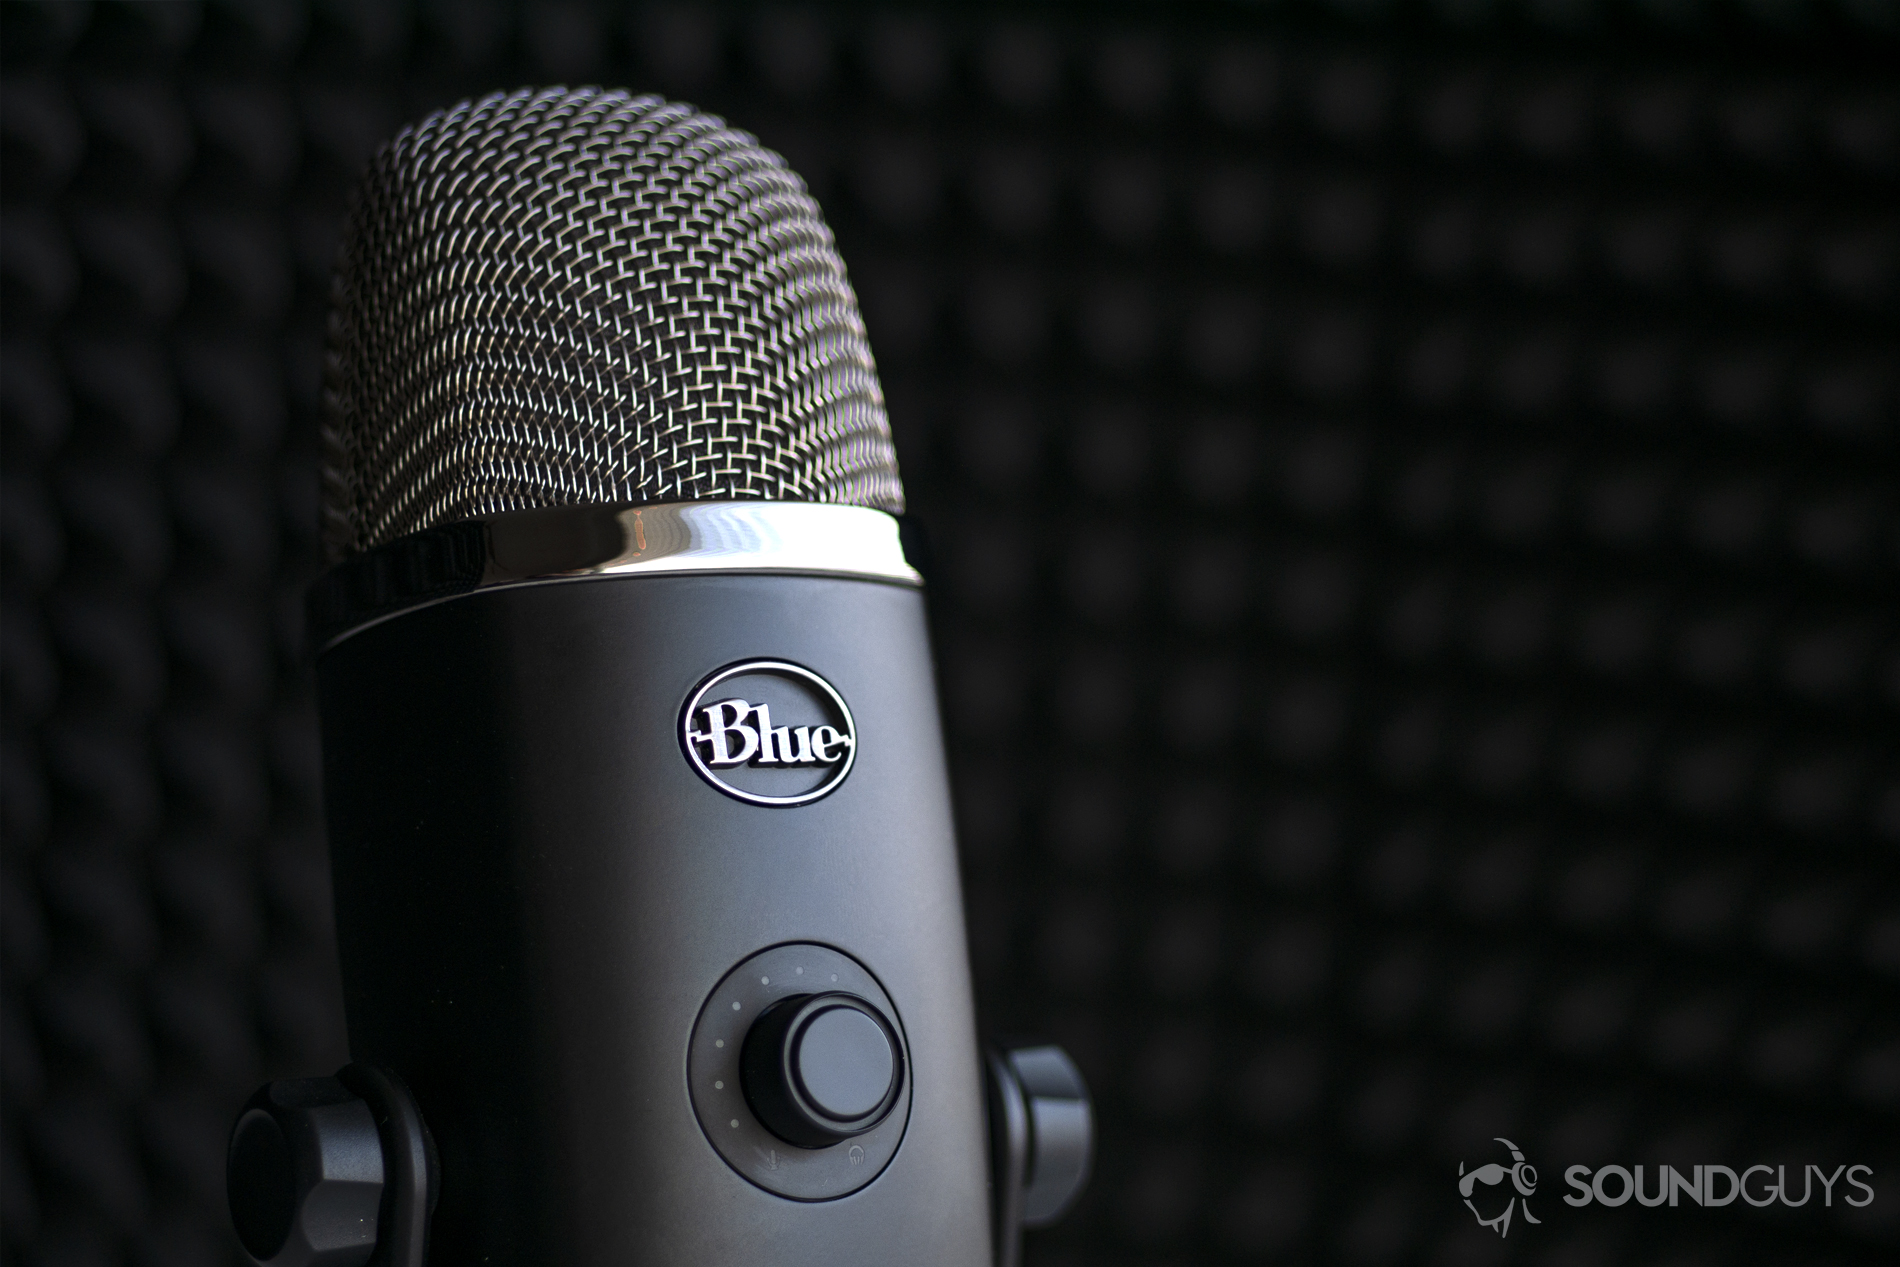 Blue Yeti vs. Yeti X microphone: What's the difference?